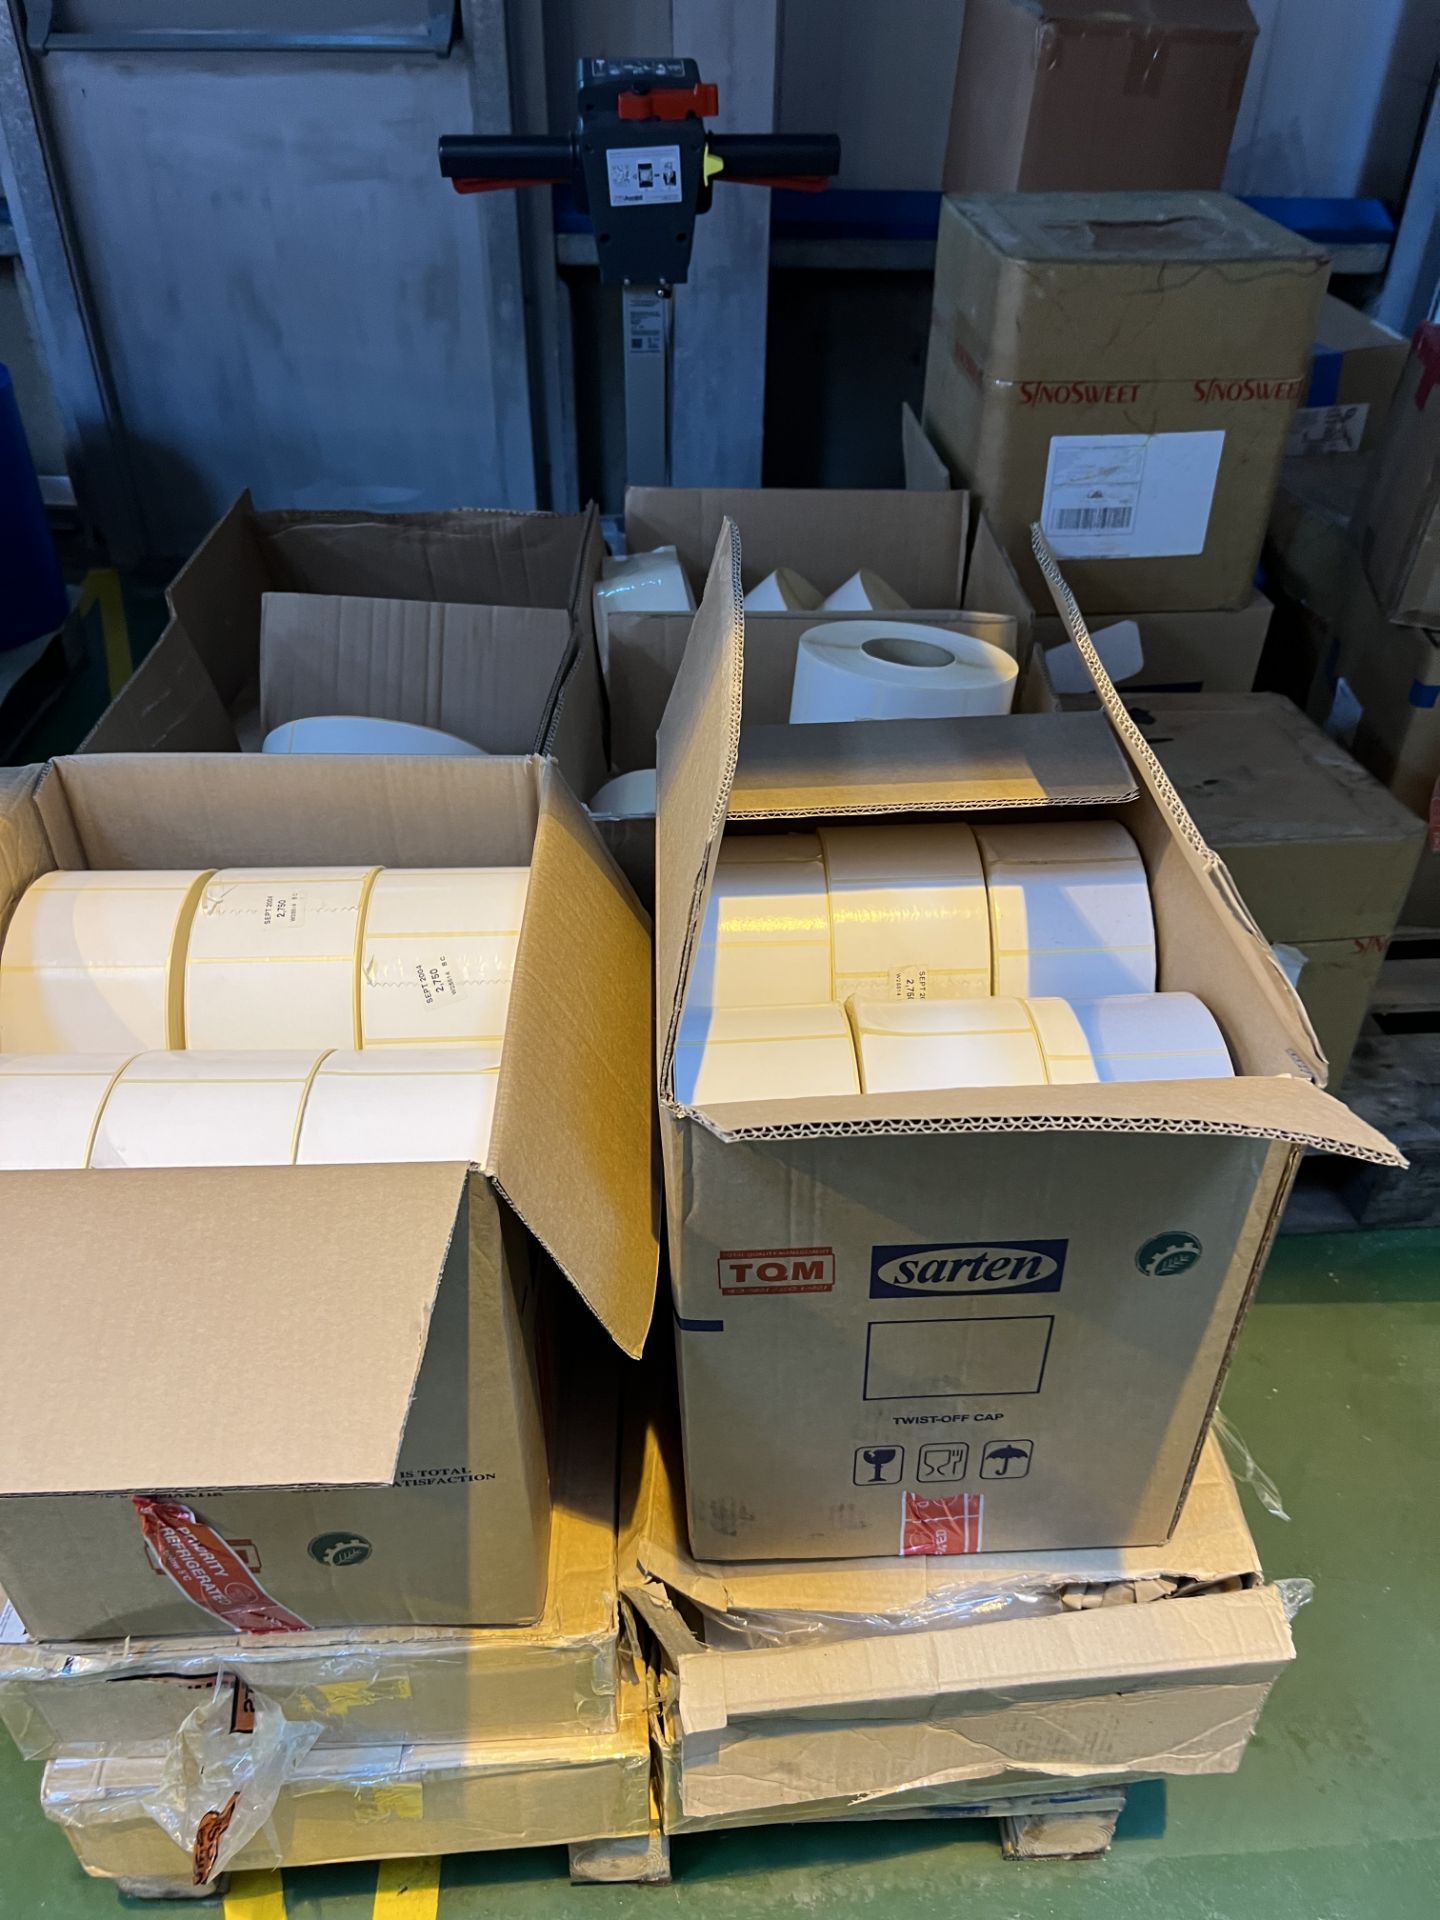 Plain Barcode Labels, as set out in cardboard boxe - Image 2 of 2